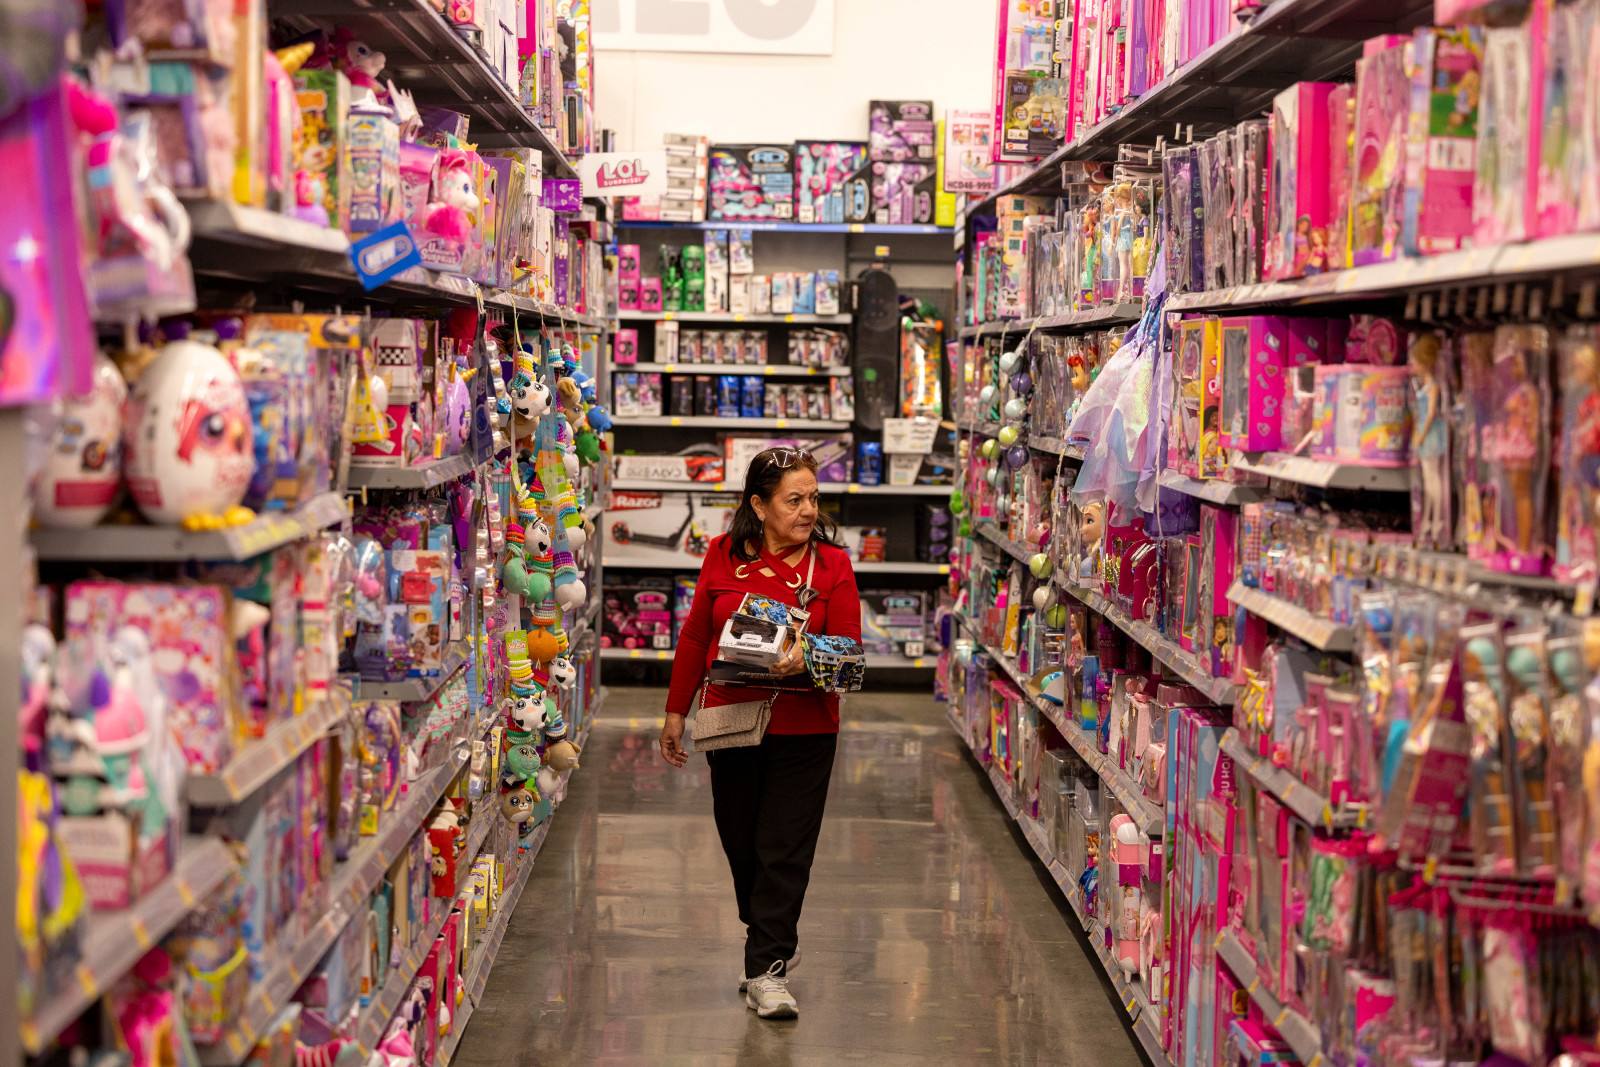 Person wearing red sweater in aisle filled with mostly pink toy boxes